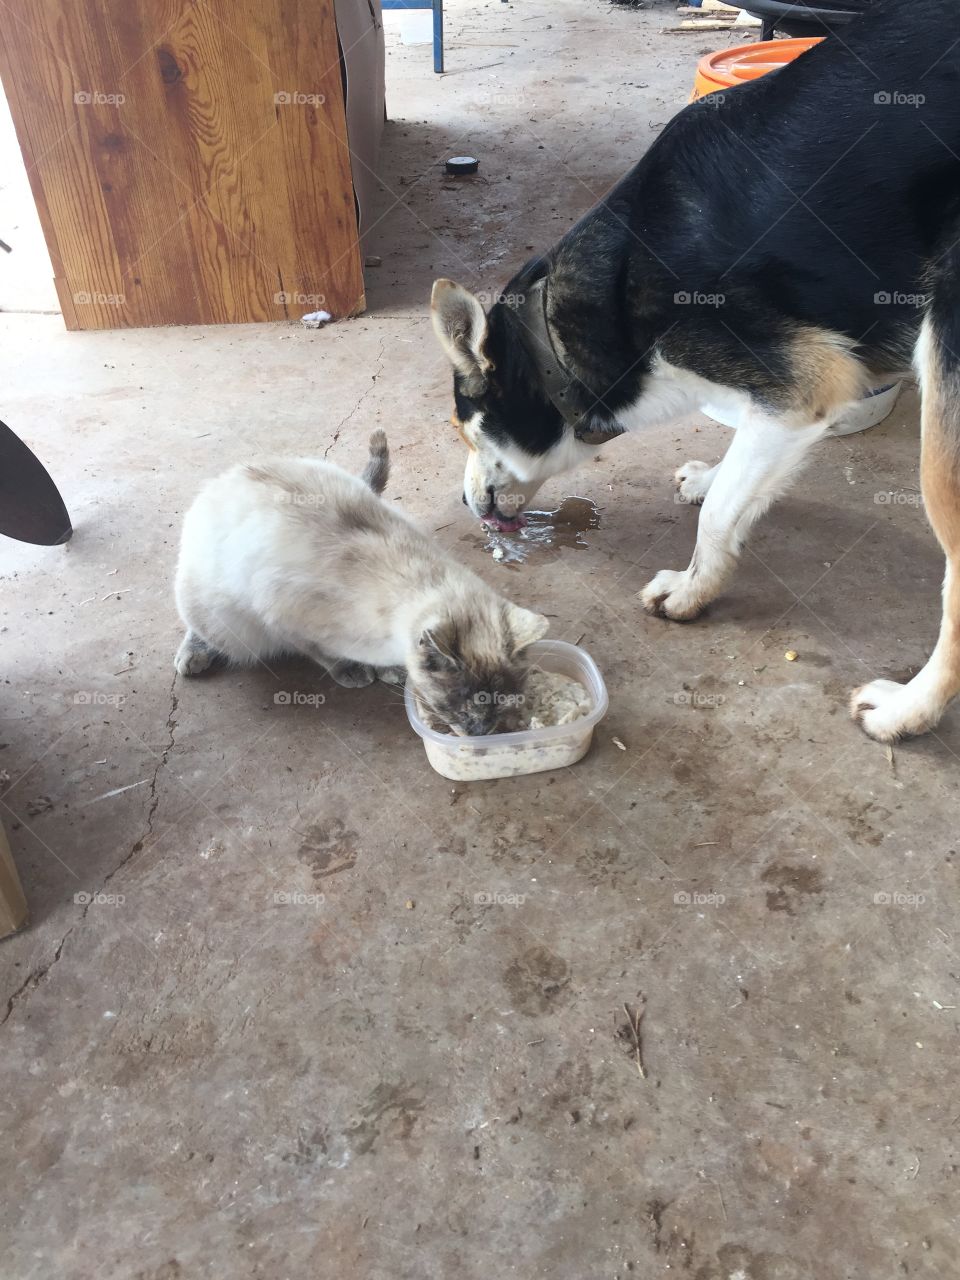 My dog and cat that don't get along well have put their differences aside of a good ol breakfast of gravy 